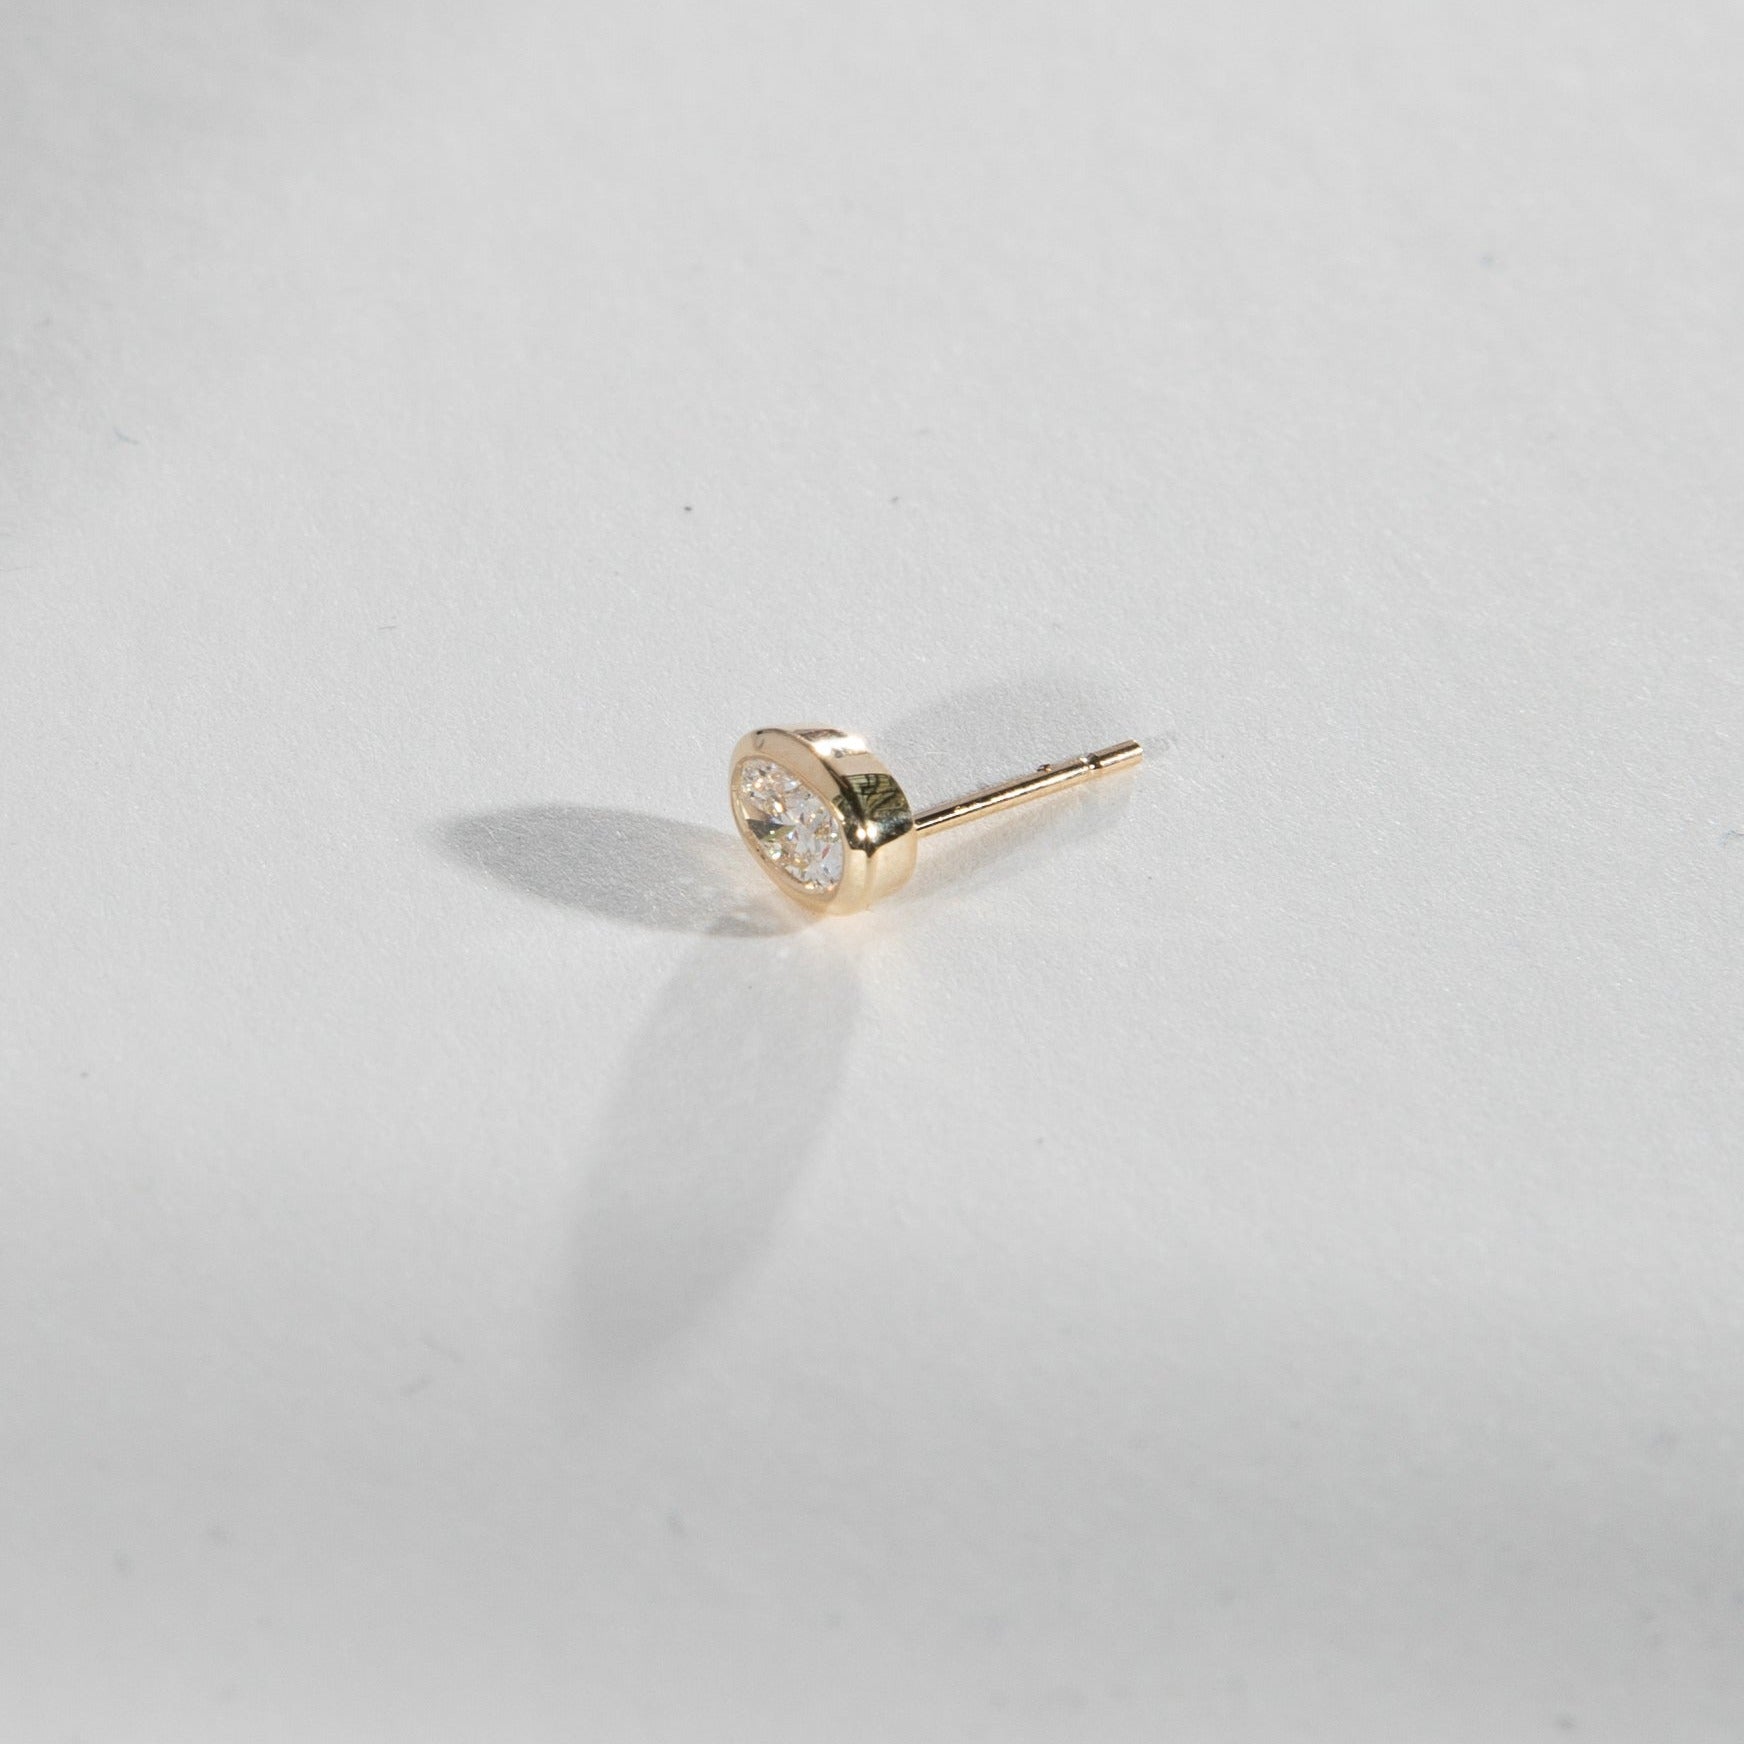 Ana Minimal Earrings in 14k Gold set with lab-grown diamonds By SHW Fine Jewelry NYC